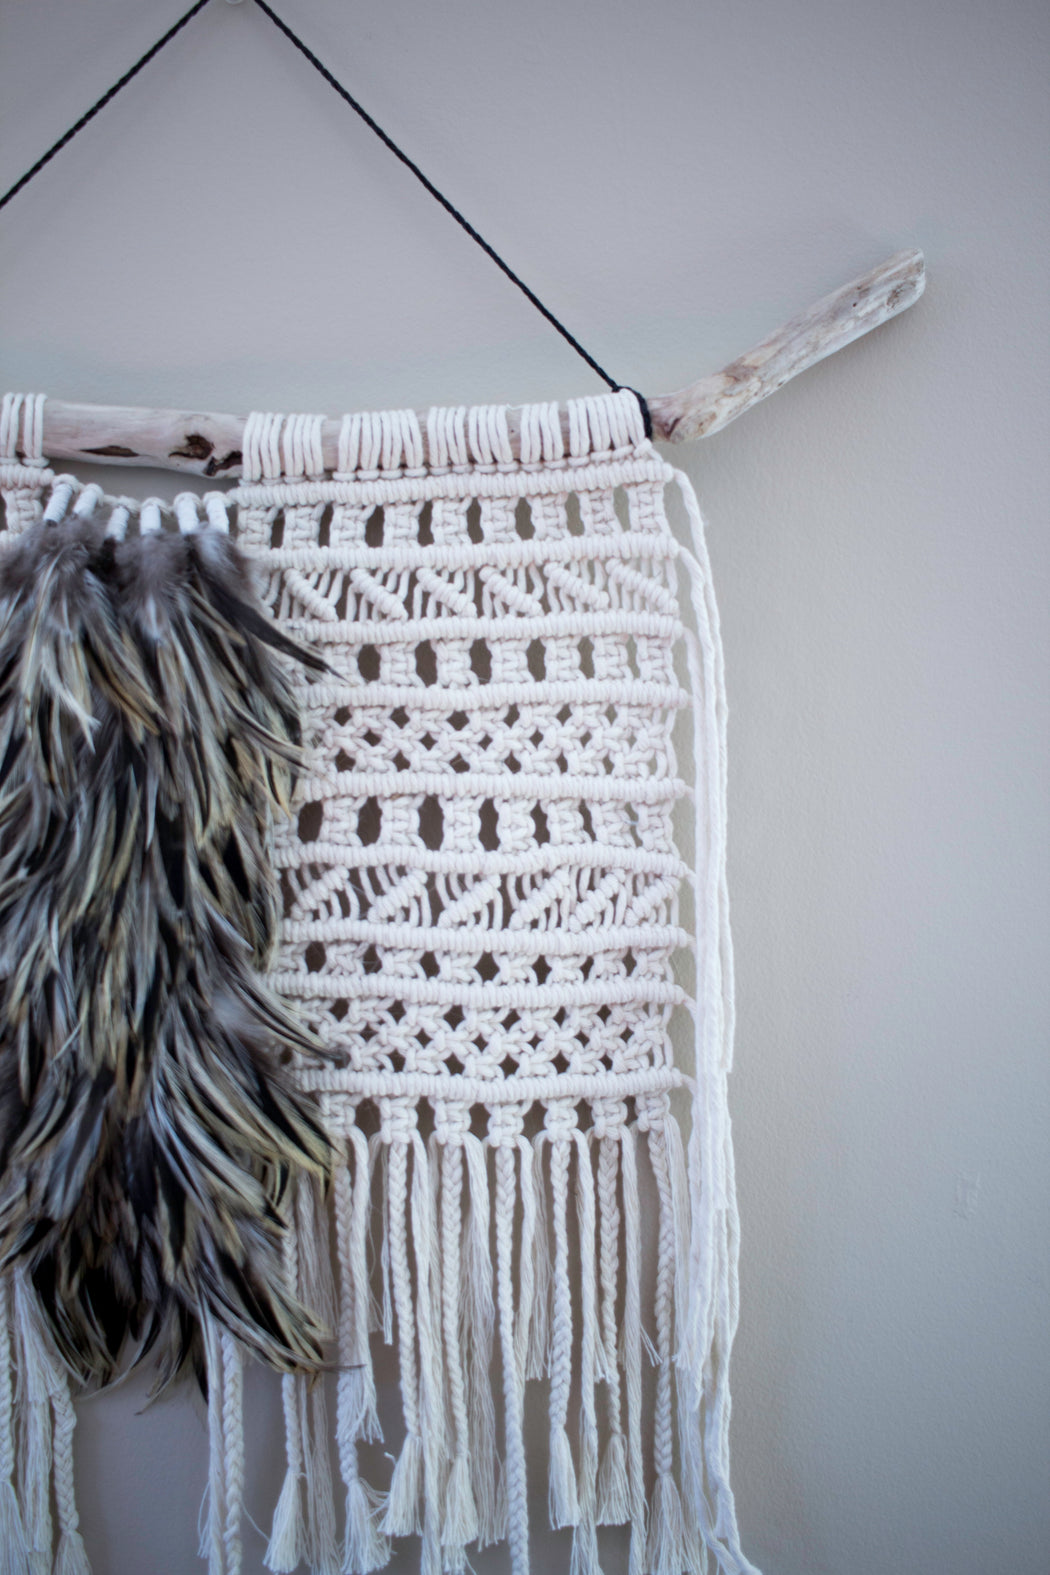 Large Macrame Wall Hanging with Feathers